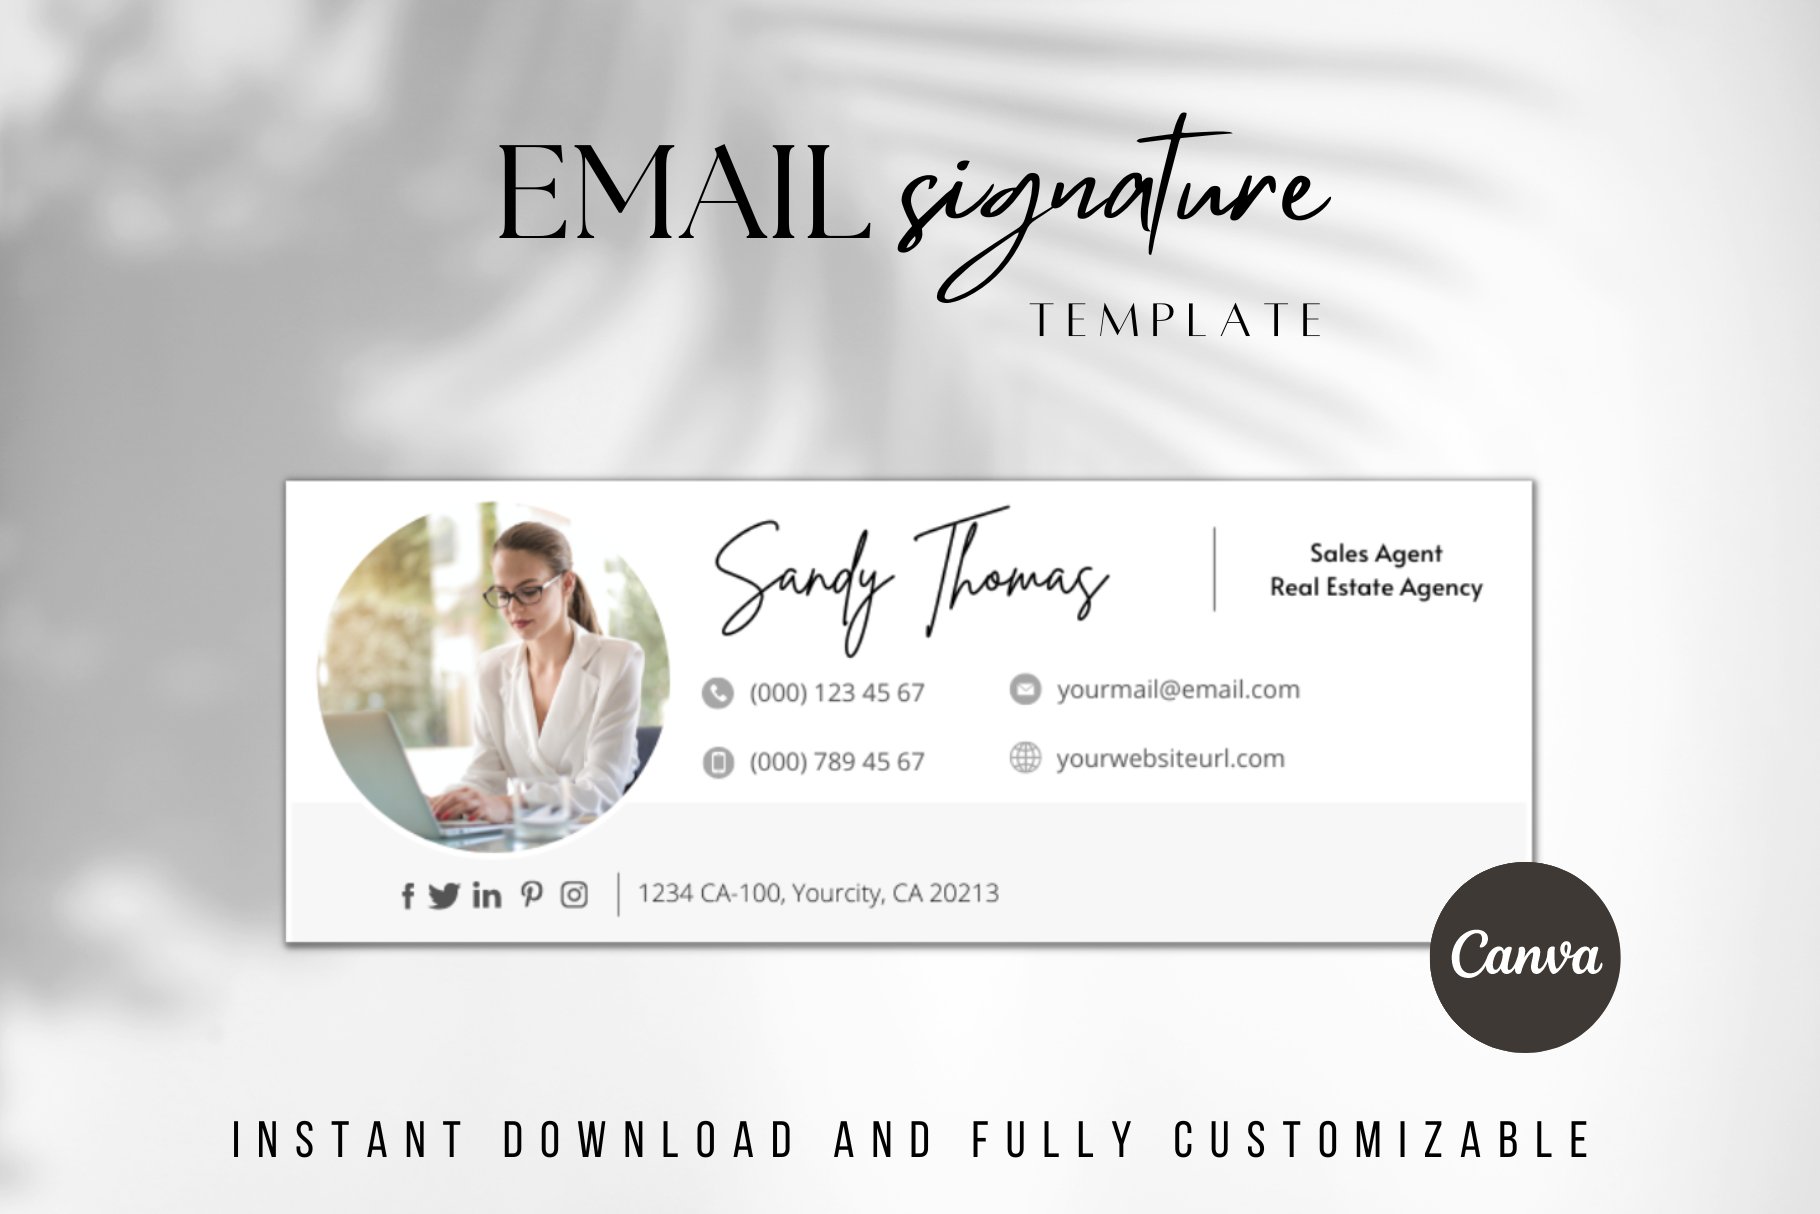 email-signature-template-canva-by-mahboubeh-on-dribbble